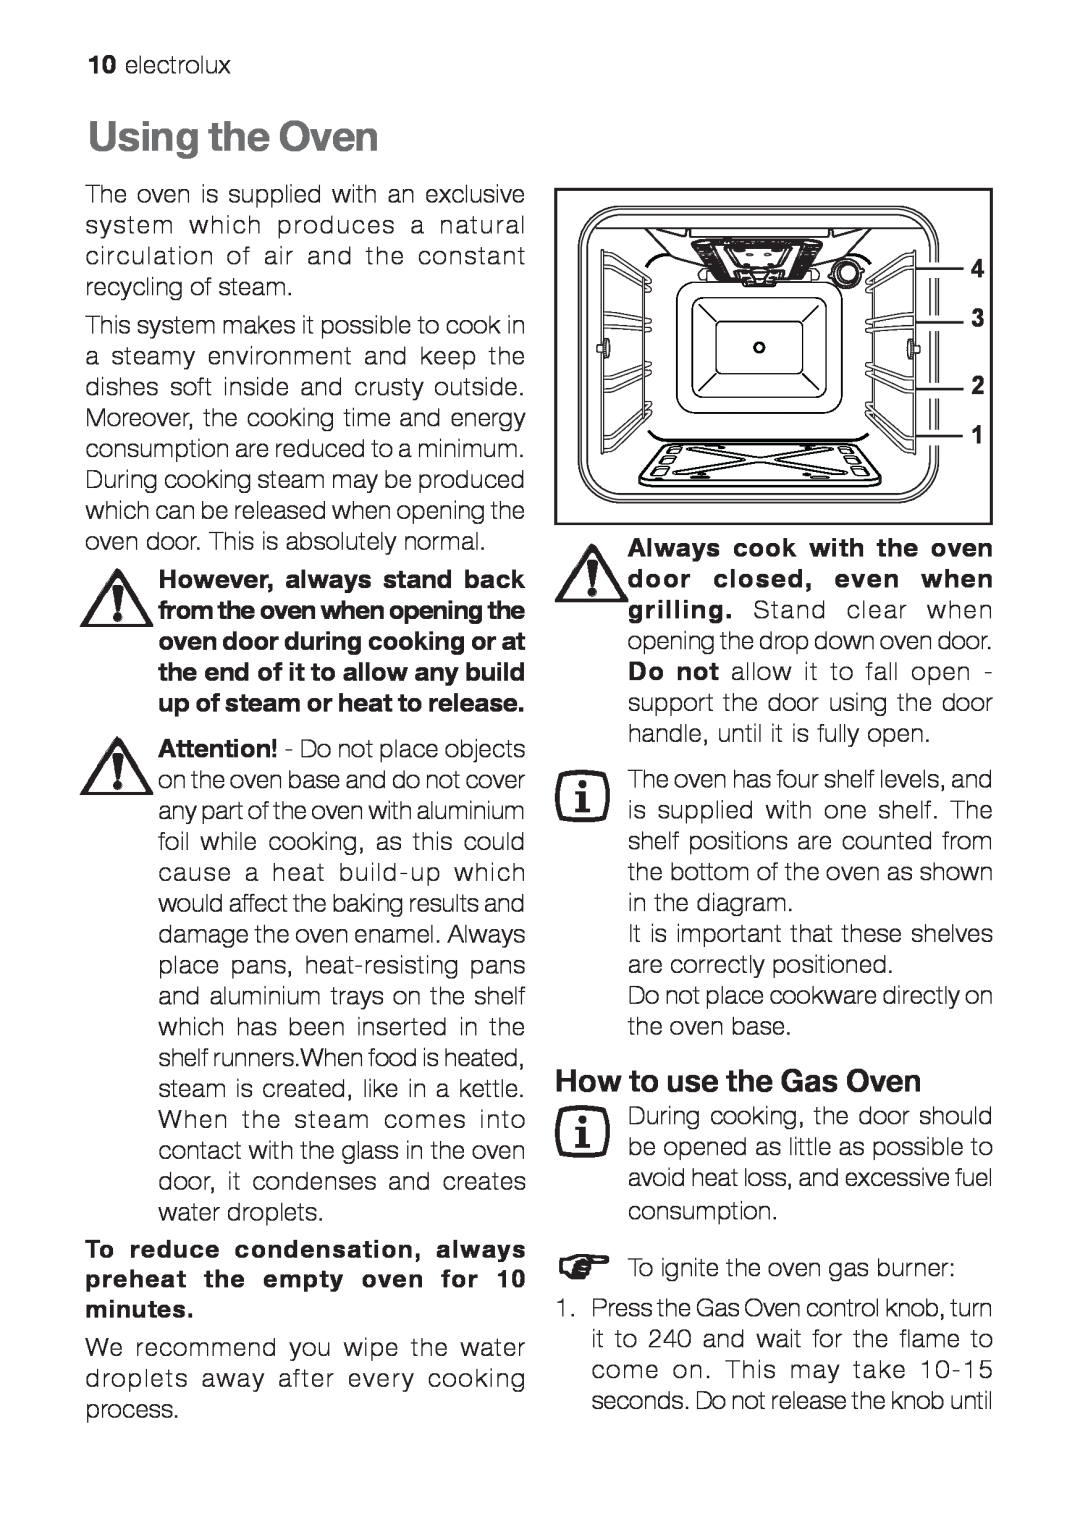 Electrolux EOG 10000 user manual Using the Oven, How to use the Gas Oven 